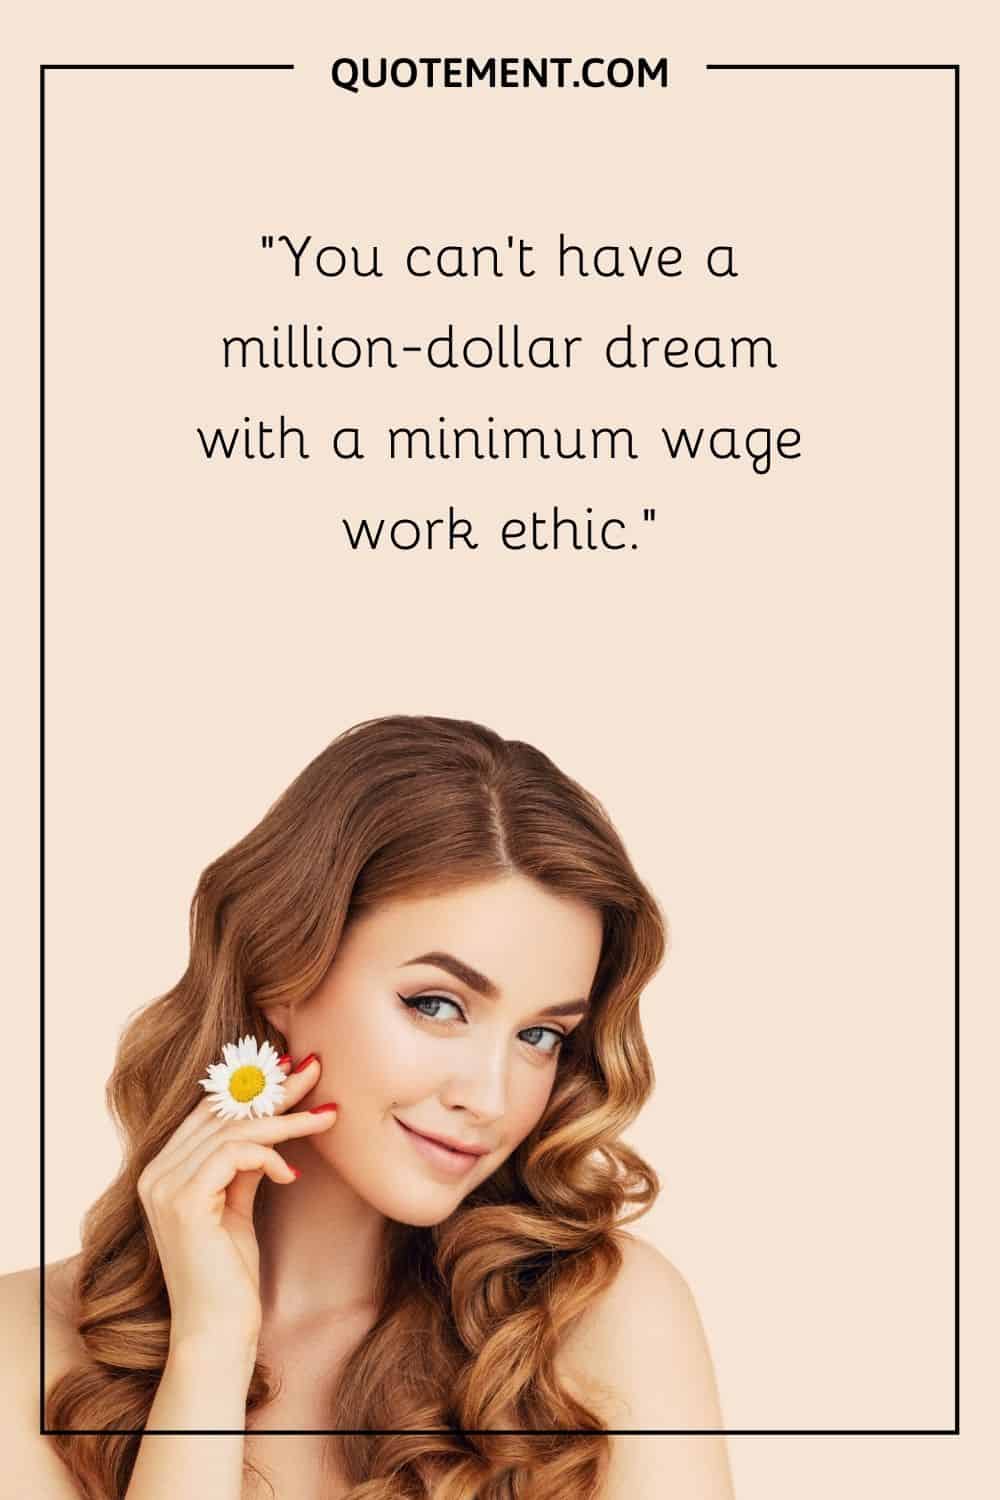 You can't have a million-dollar dream with a minimum wage work ethic